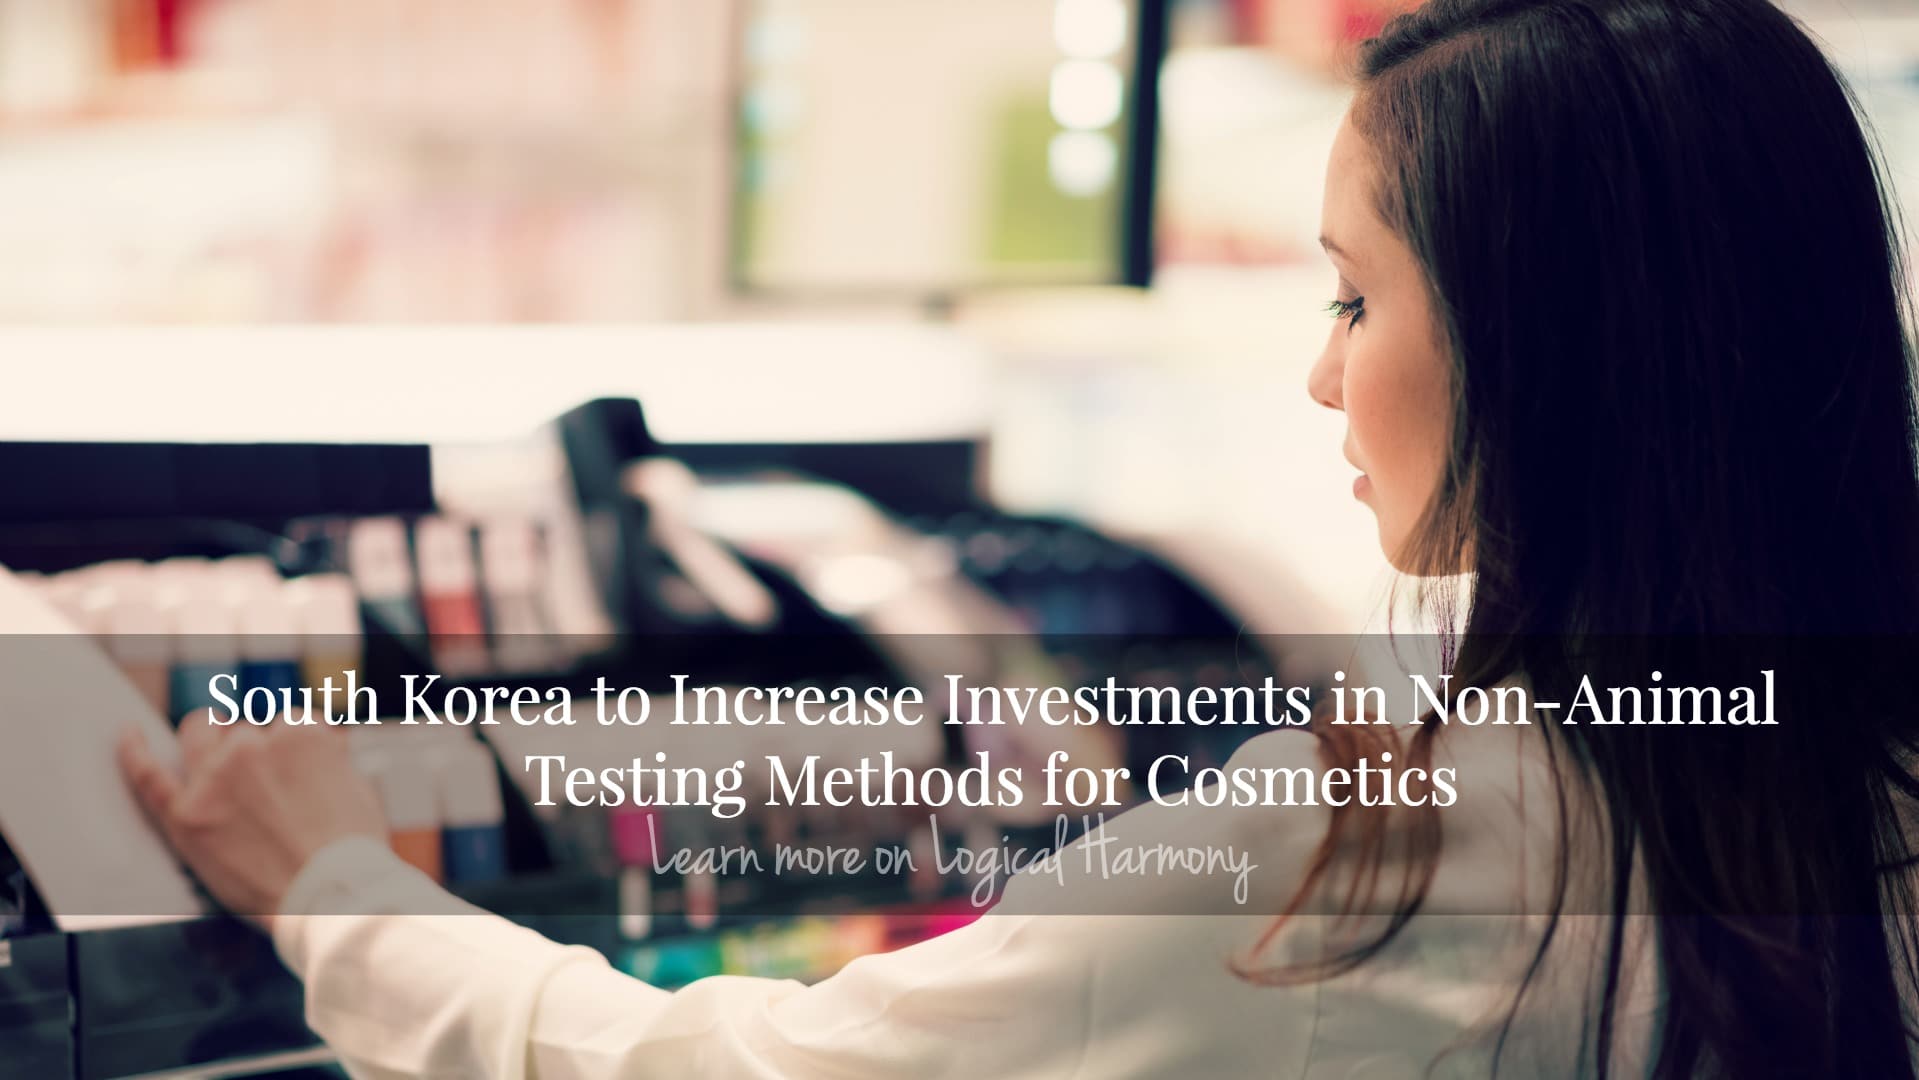 South Korea to Increase Investments in Non-Animal Testing Methods for Cosmetics